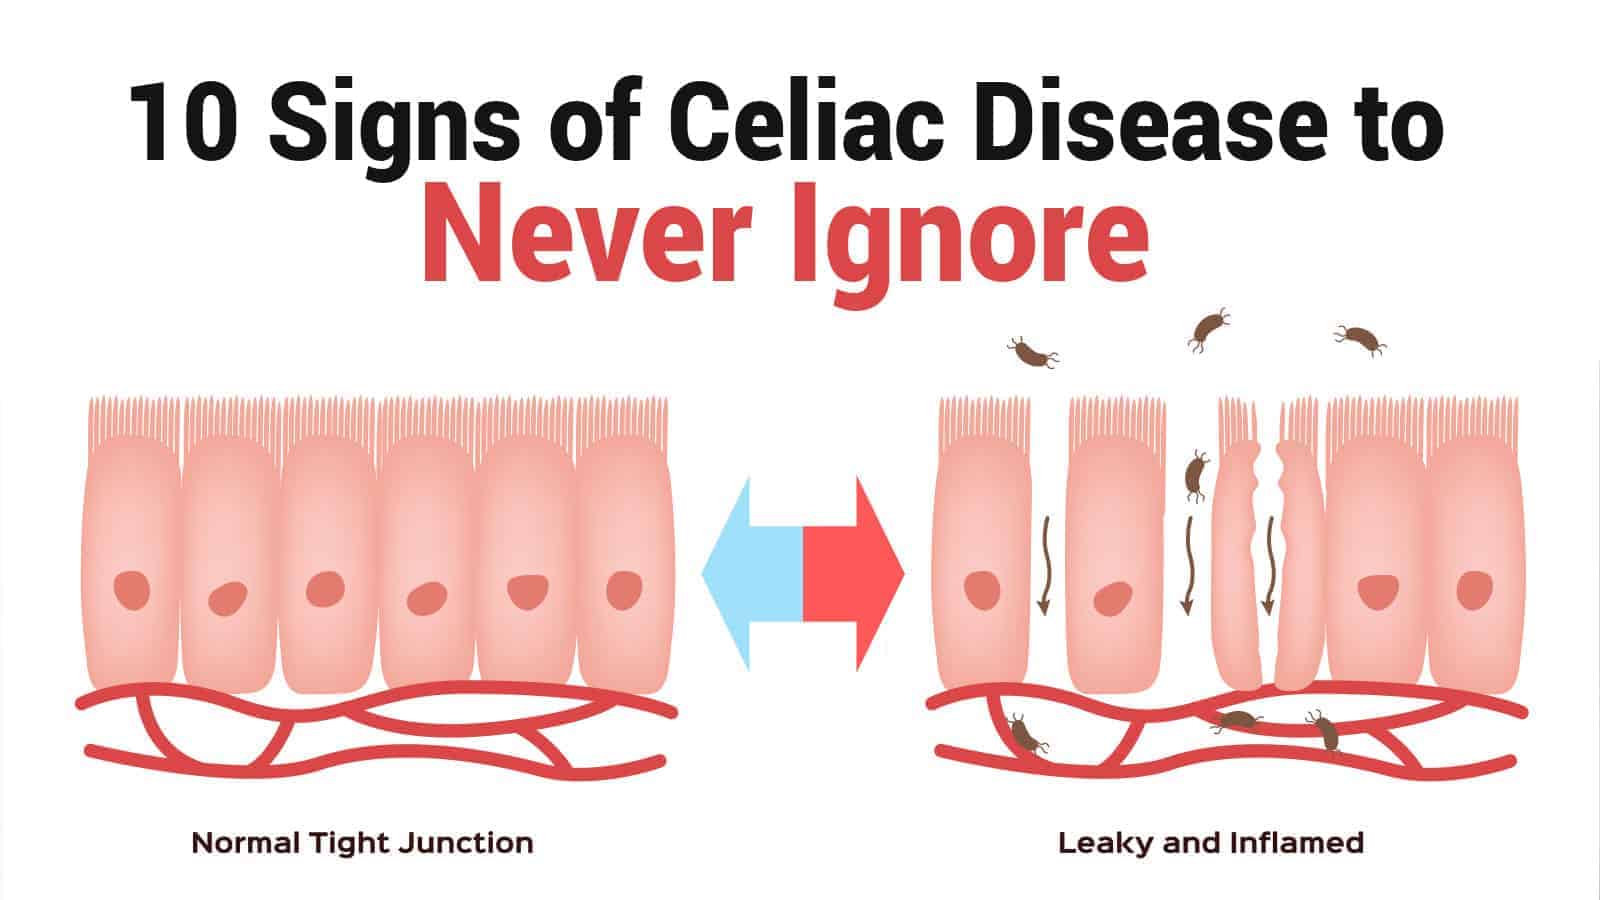 10 Signs of Celiac Disease to Never Ignore